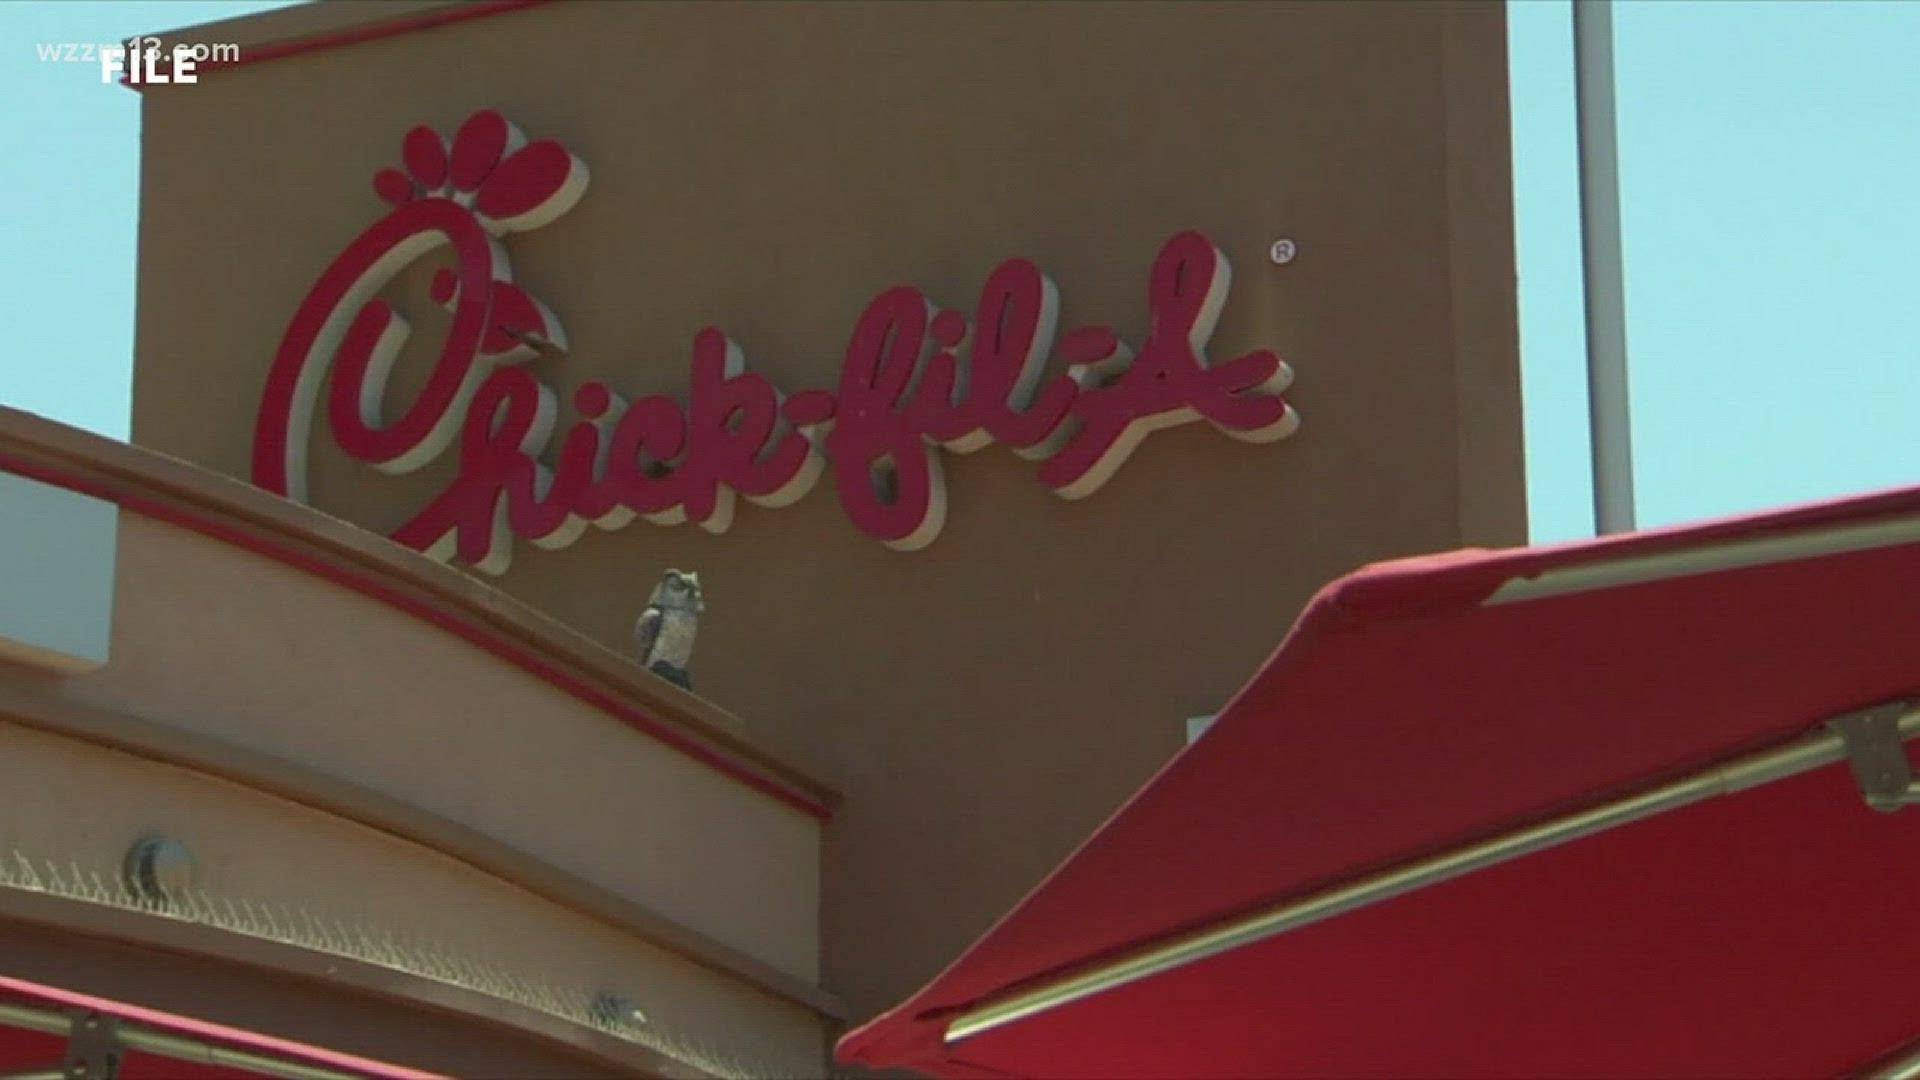 Chick-fil-A offering free chicken biscuits